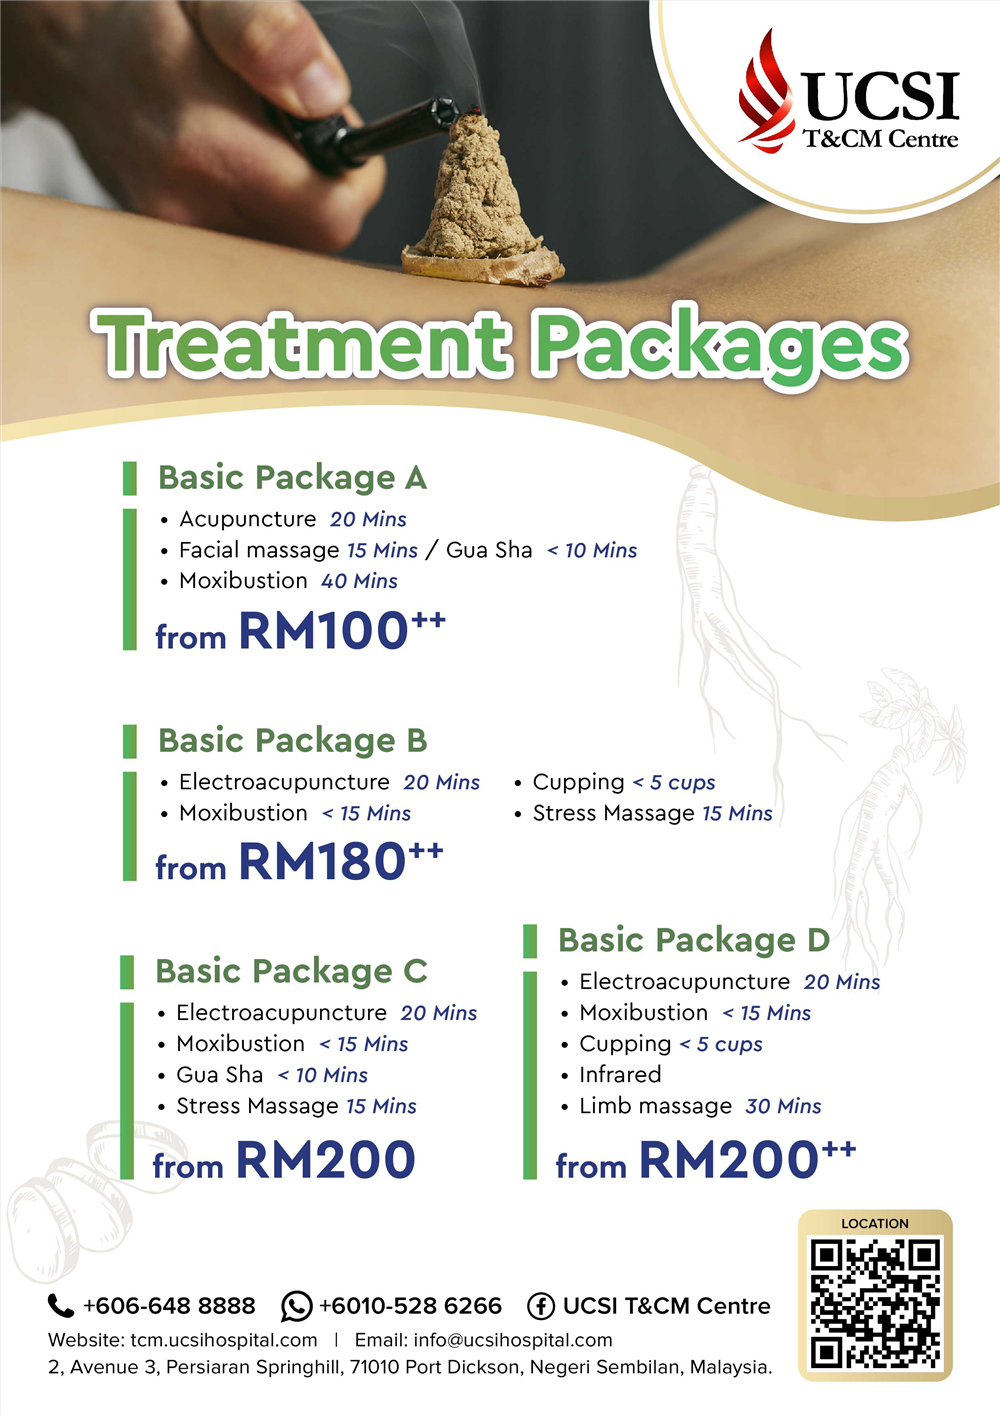 Treatment Packages Basic
(A, B & C)